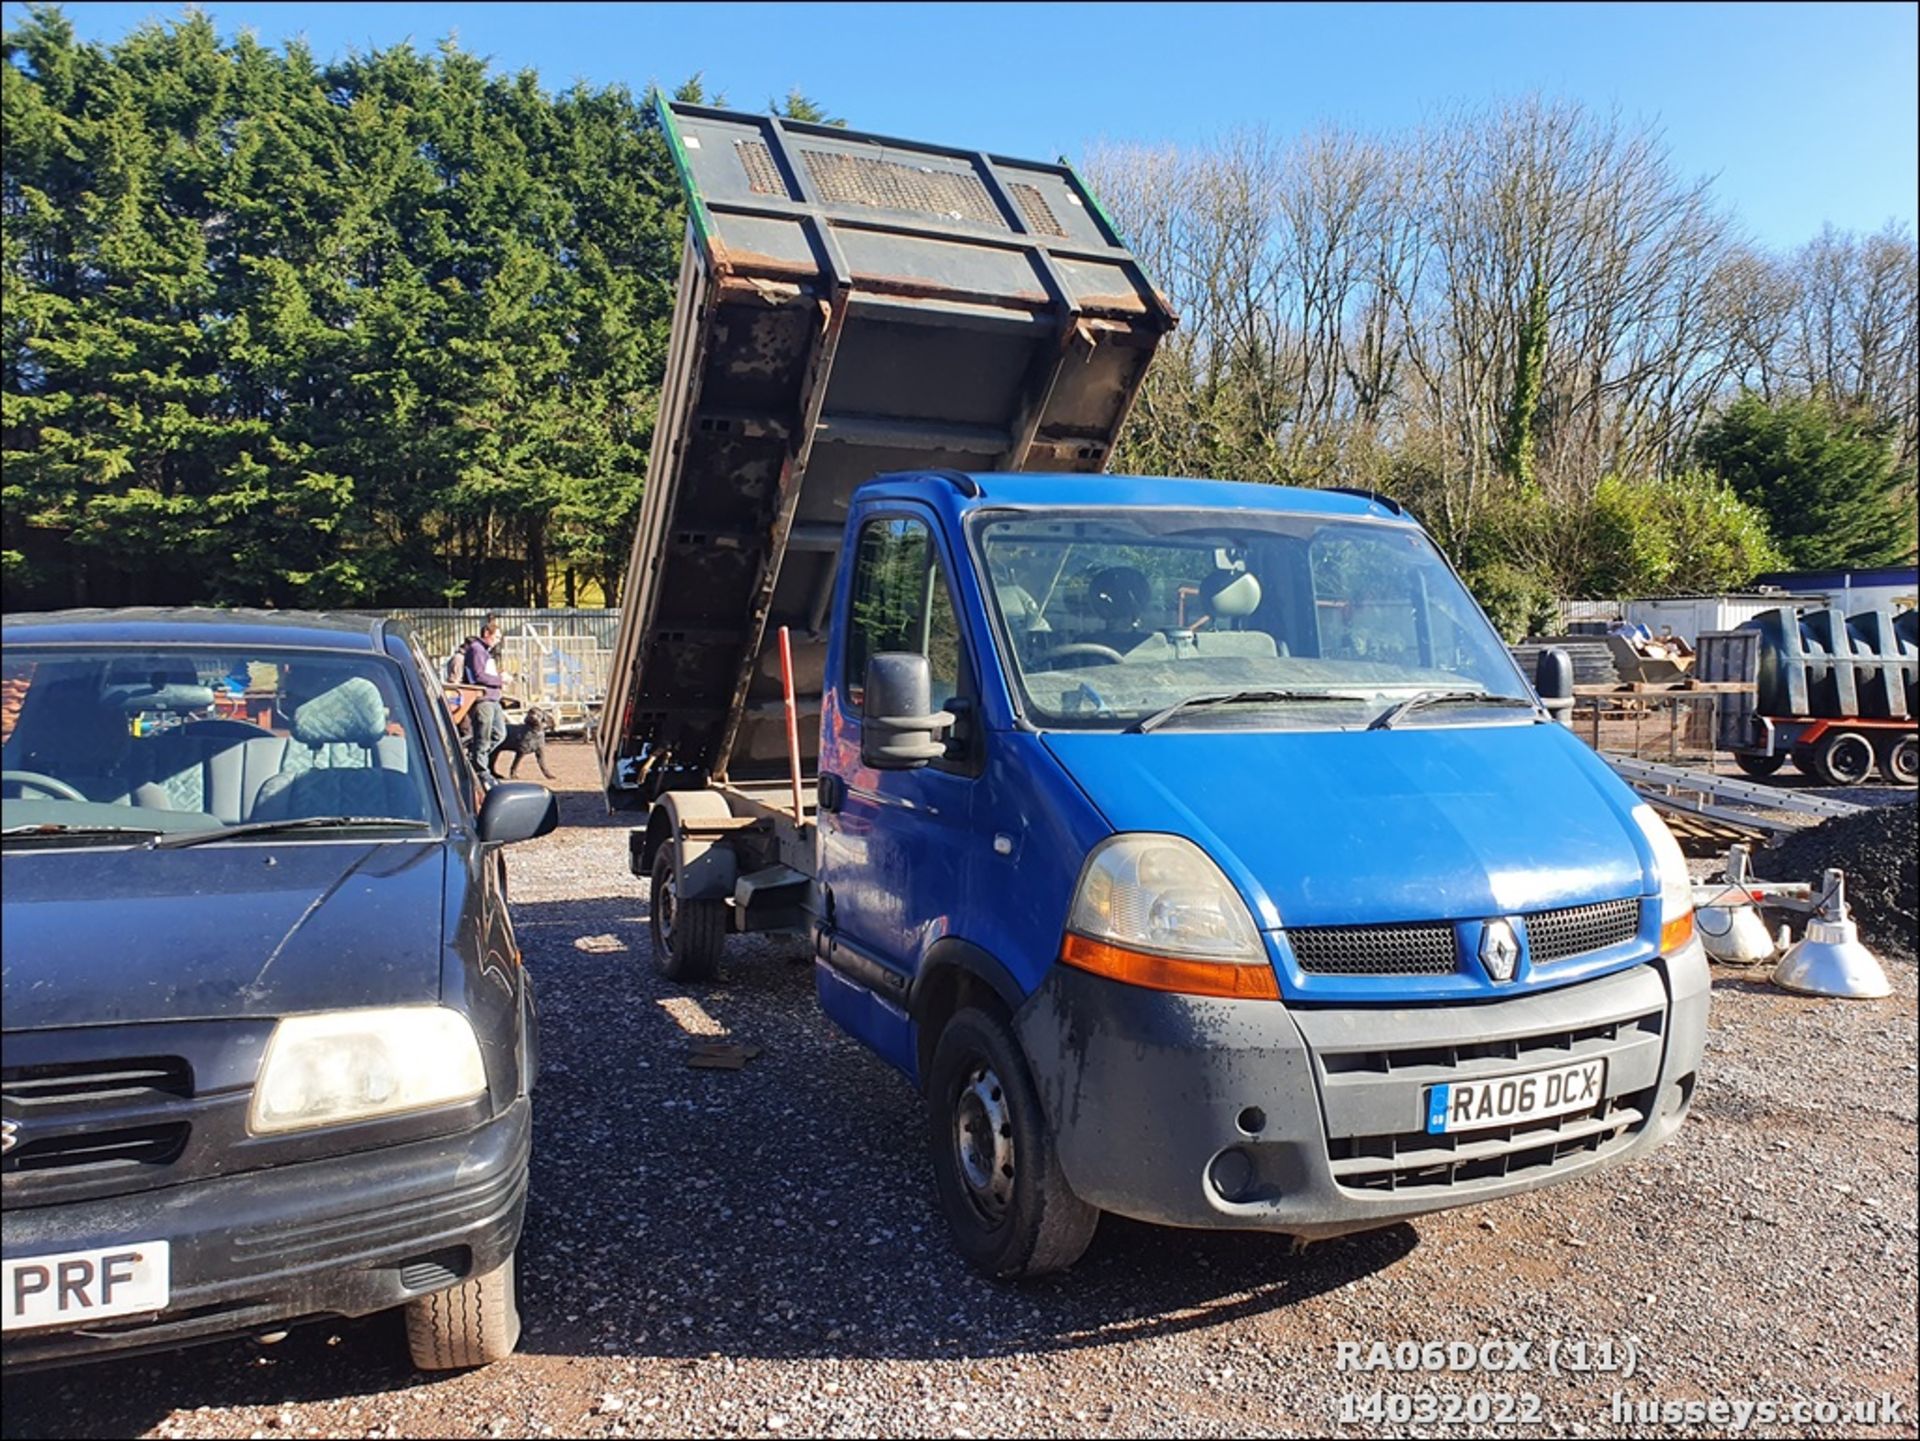 06/06 RENAULT MASTER CCML35 DCI 120 MWB - 2463cc 2dr Tipper (Grey) - Image 11 of 22